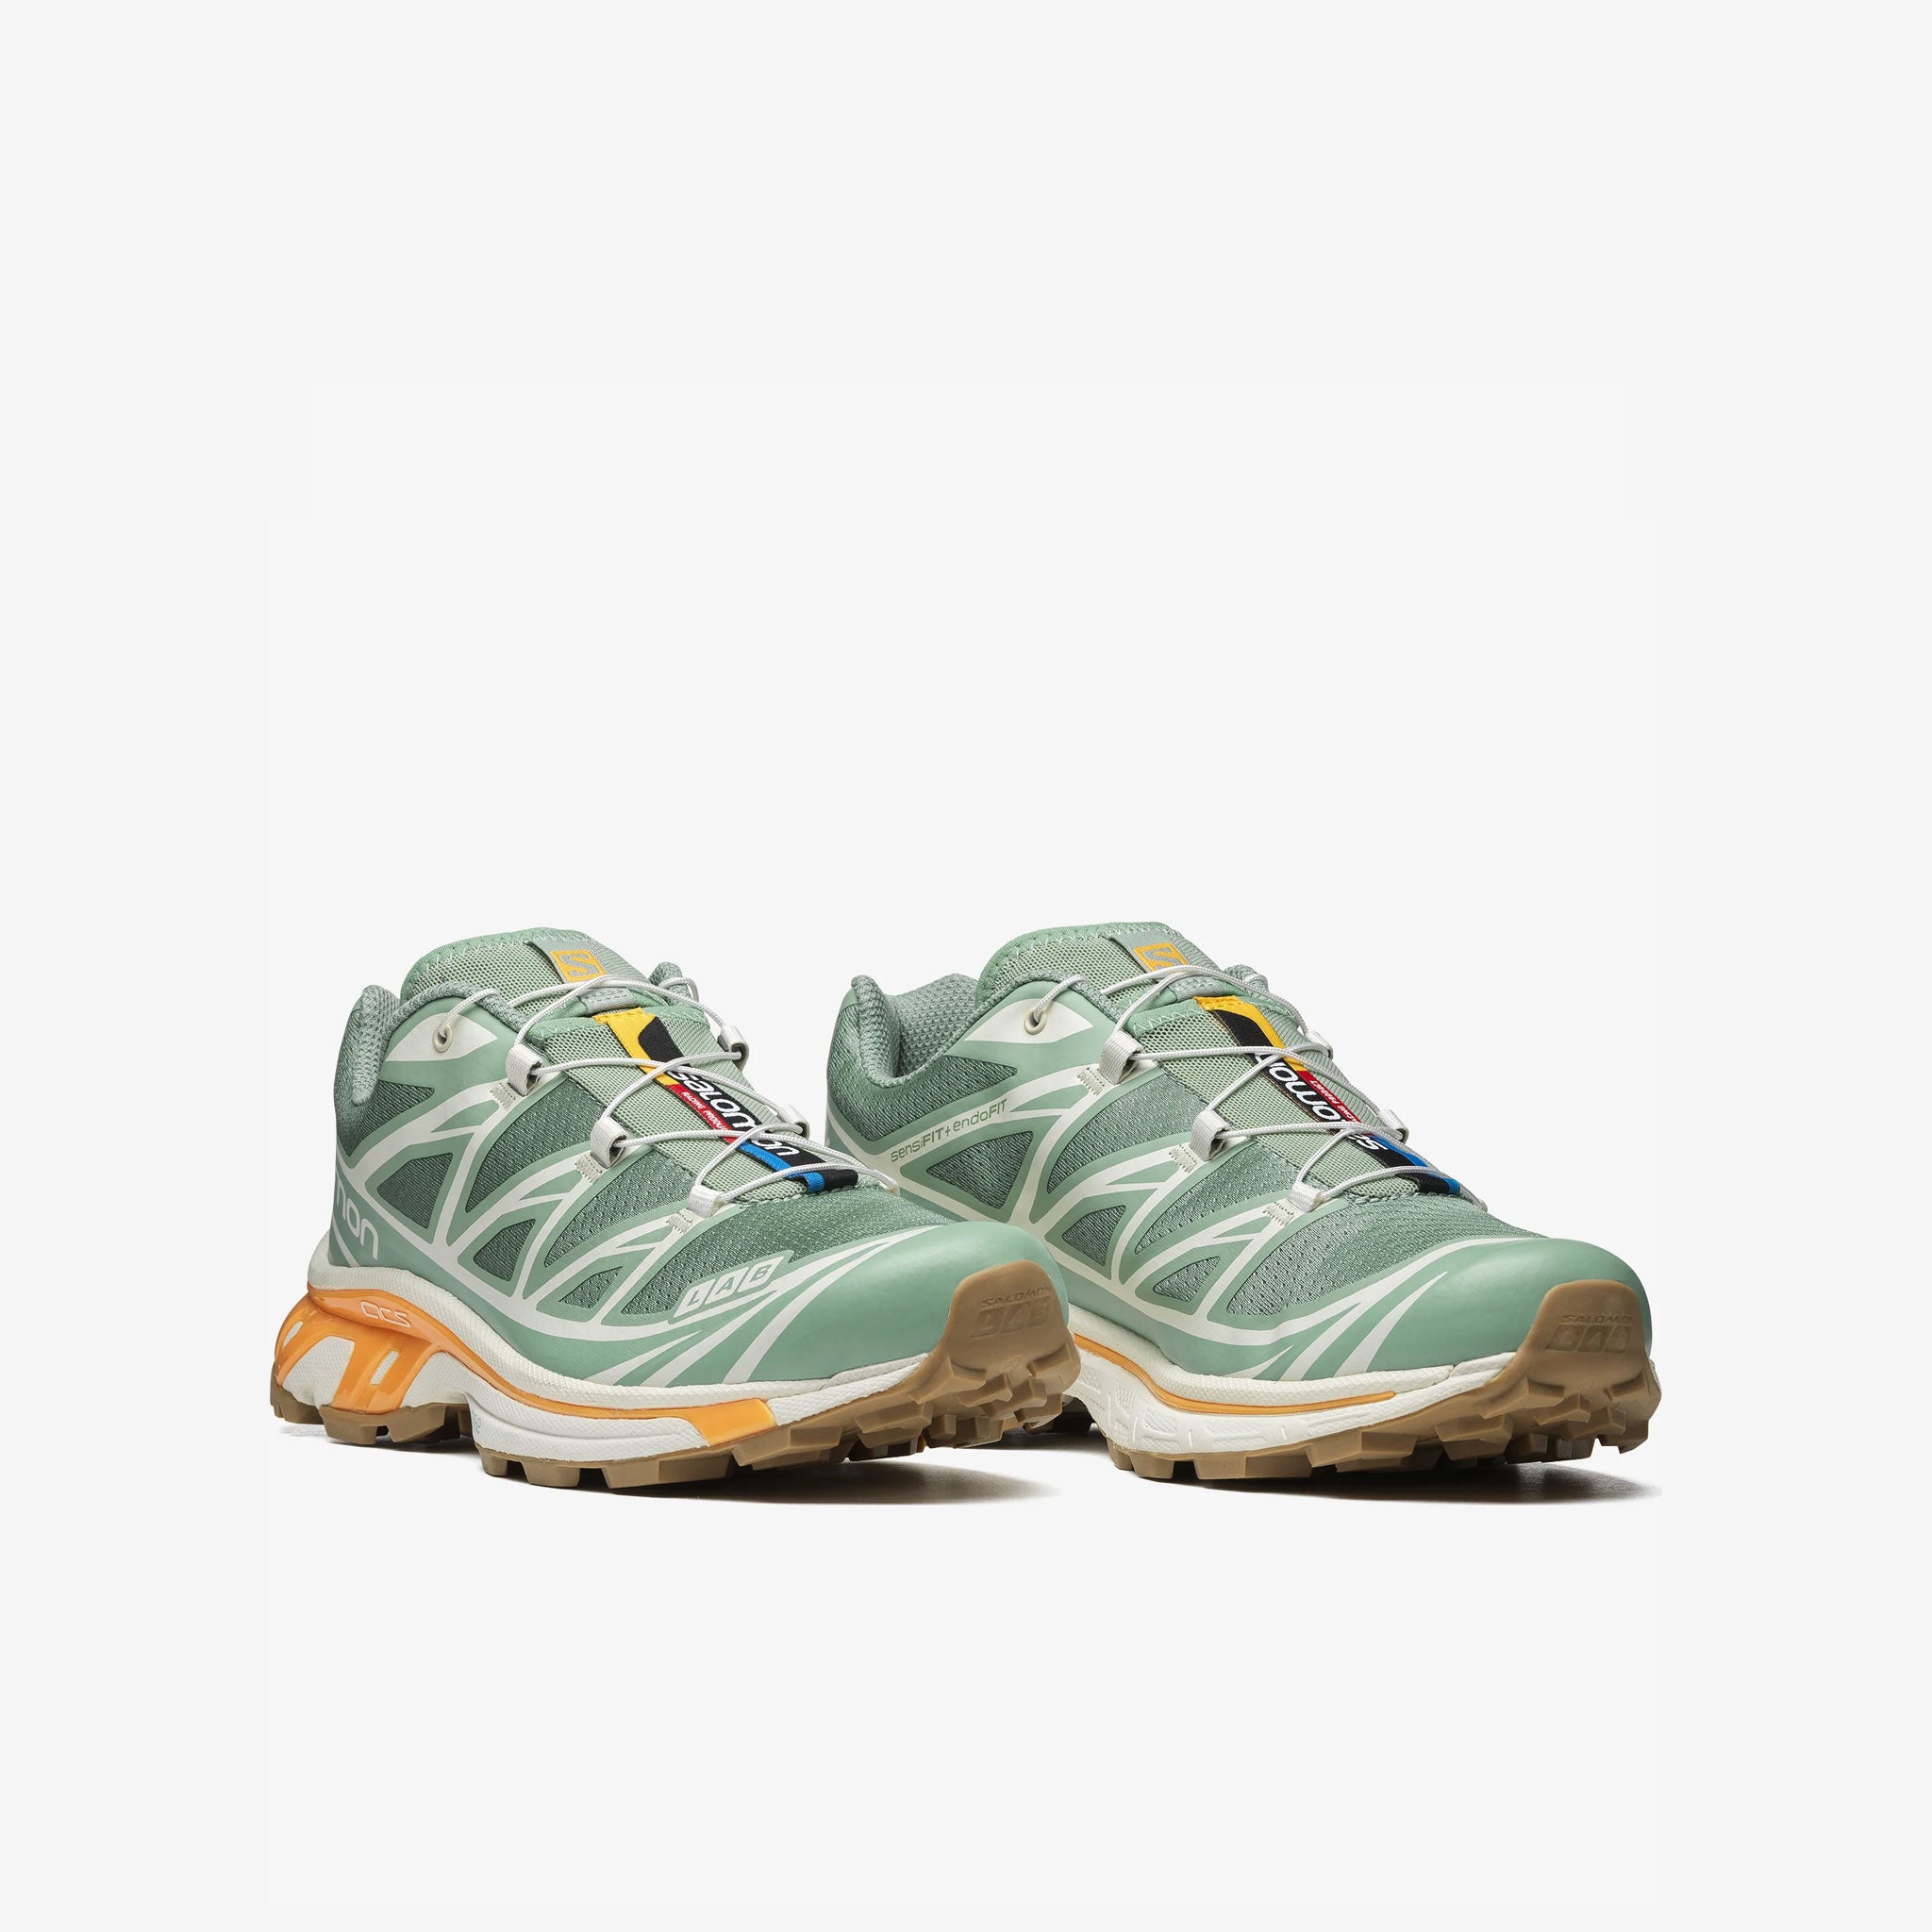 Salomon XT-6 sneakers in a pale green colorway with light orange trim along the sole. Angled front view.